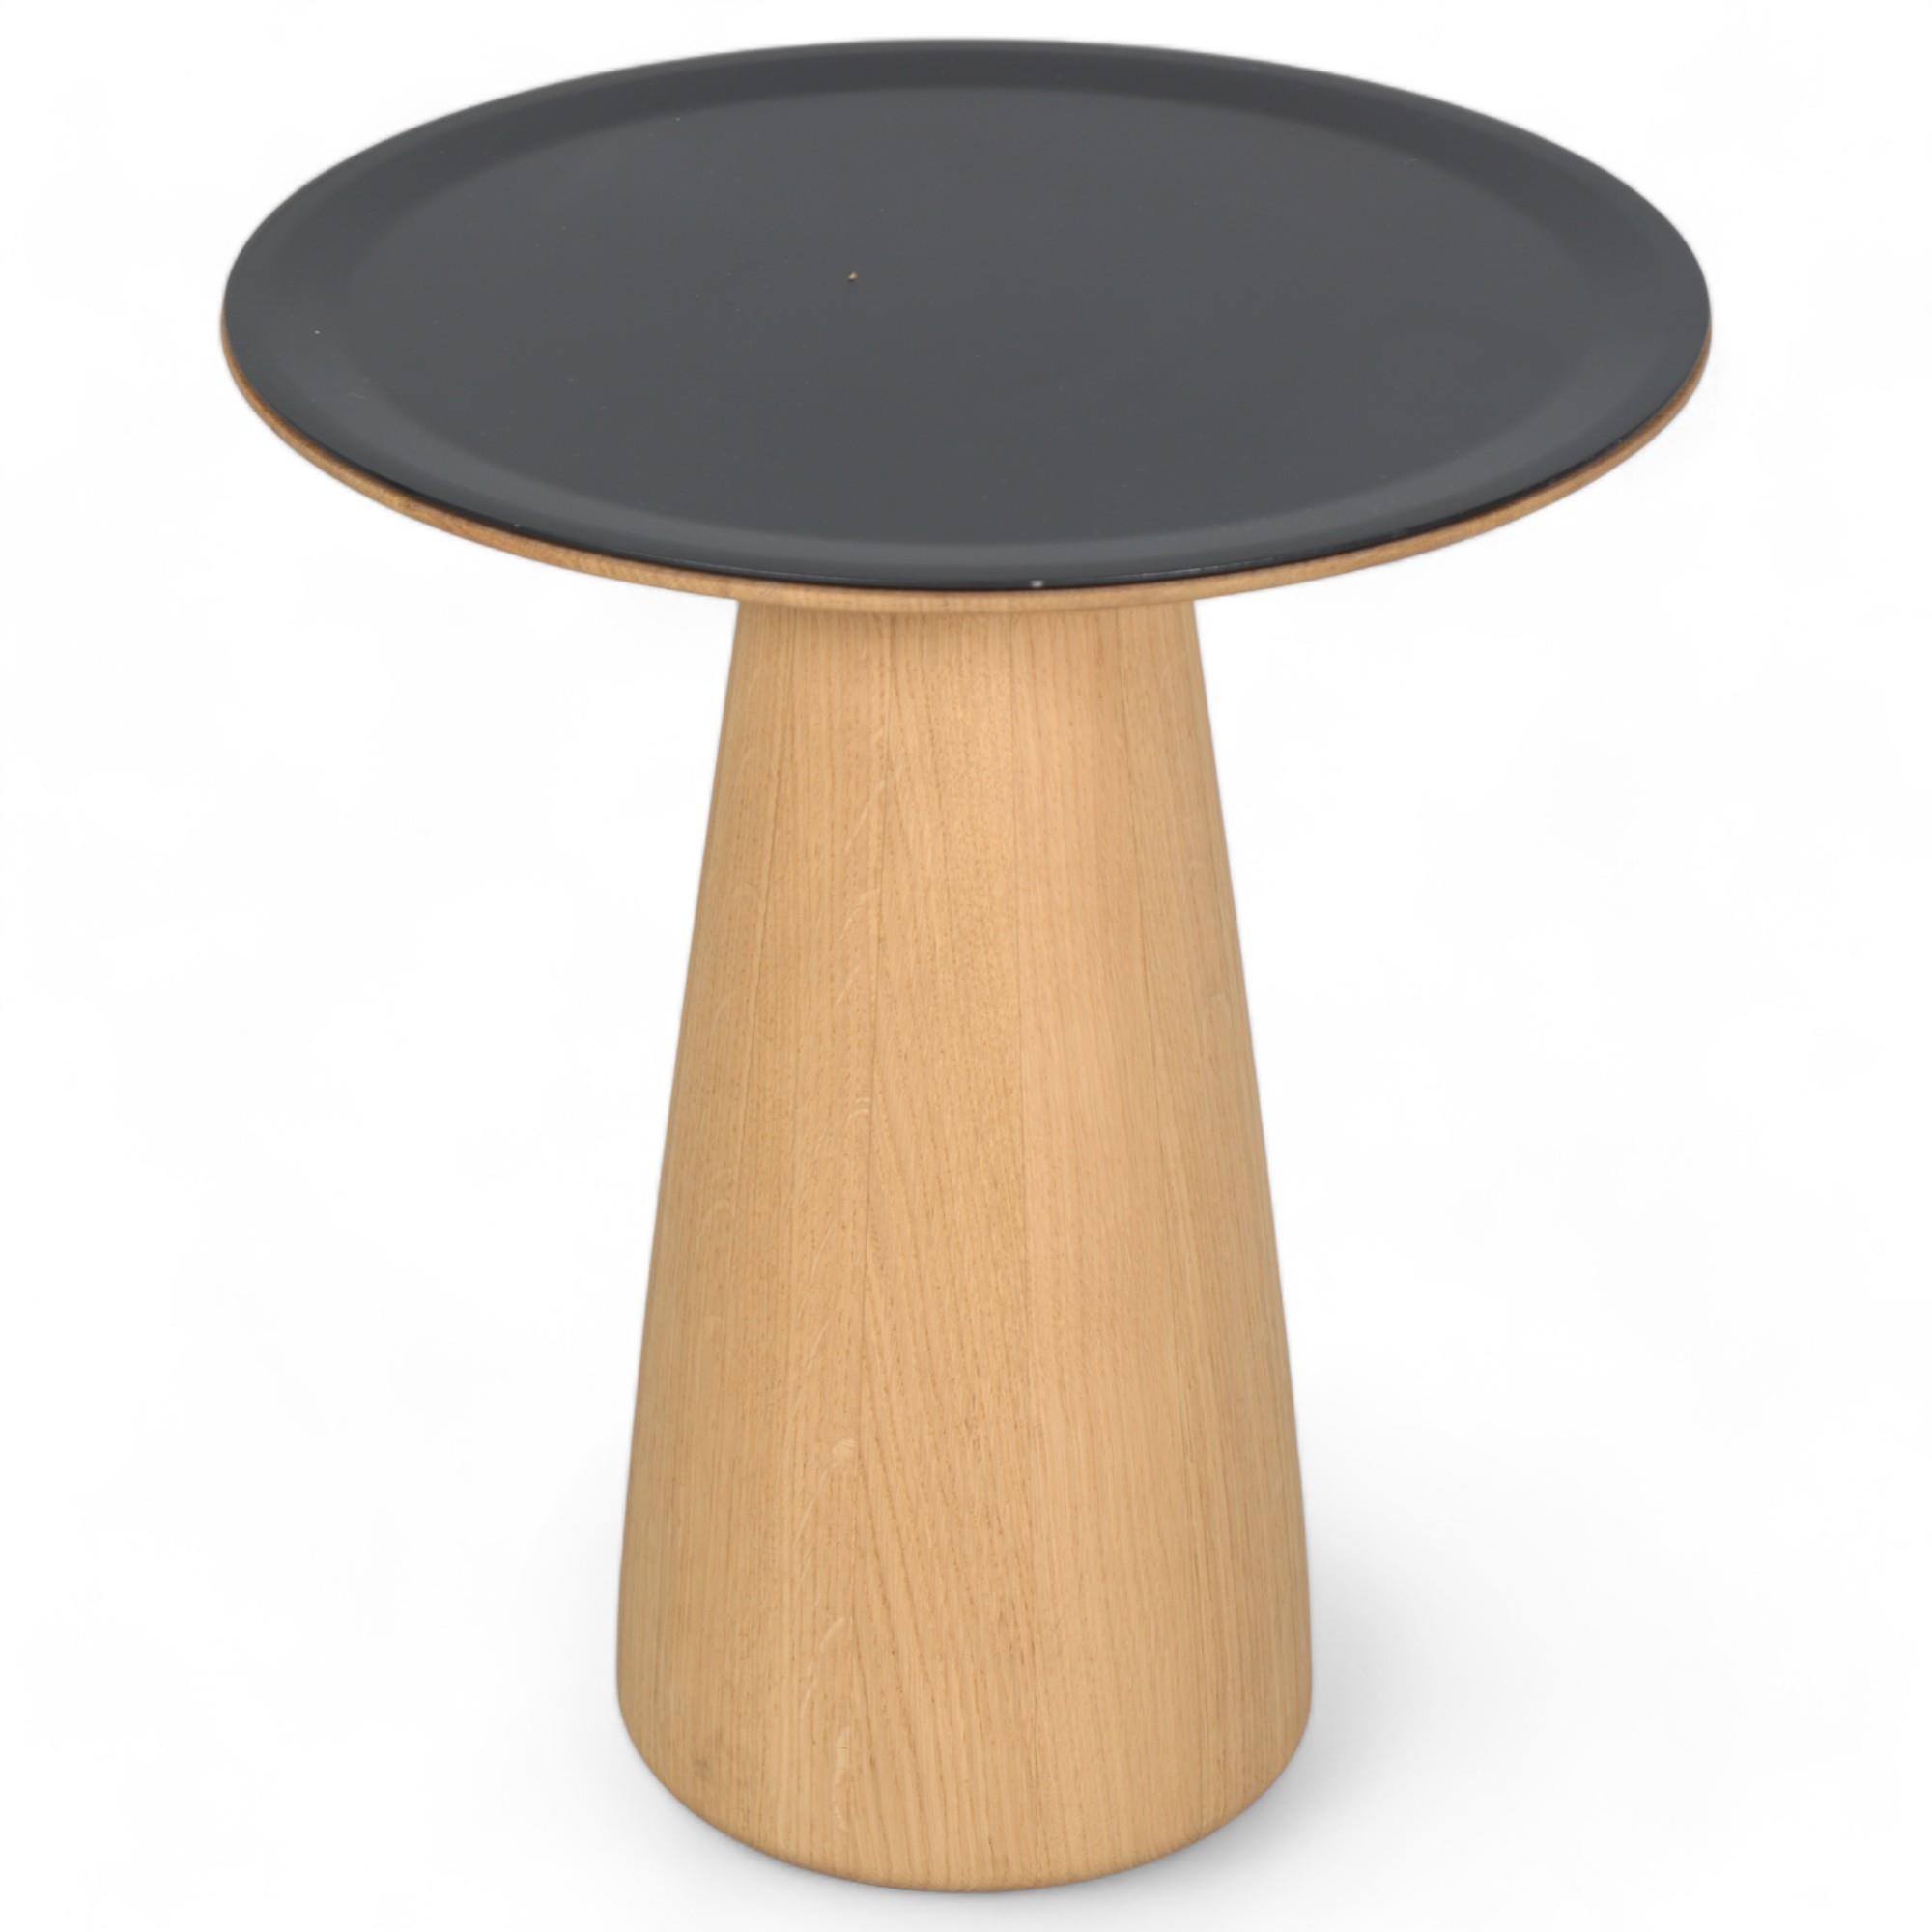 Walter Knoll, a Norman Foster 620 side table, the metal top on wooden tulip base, current RRP ca £